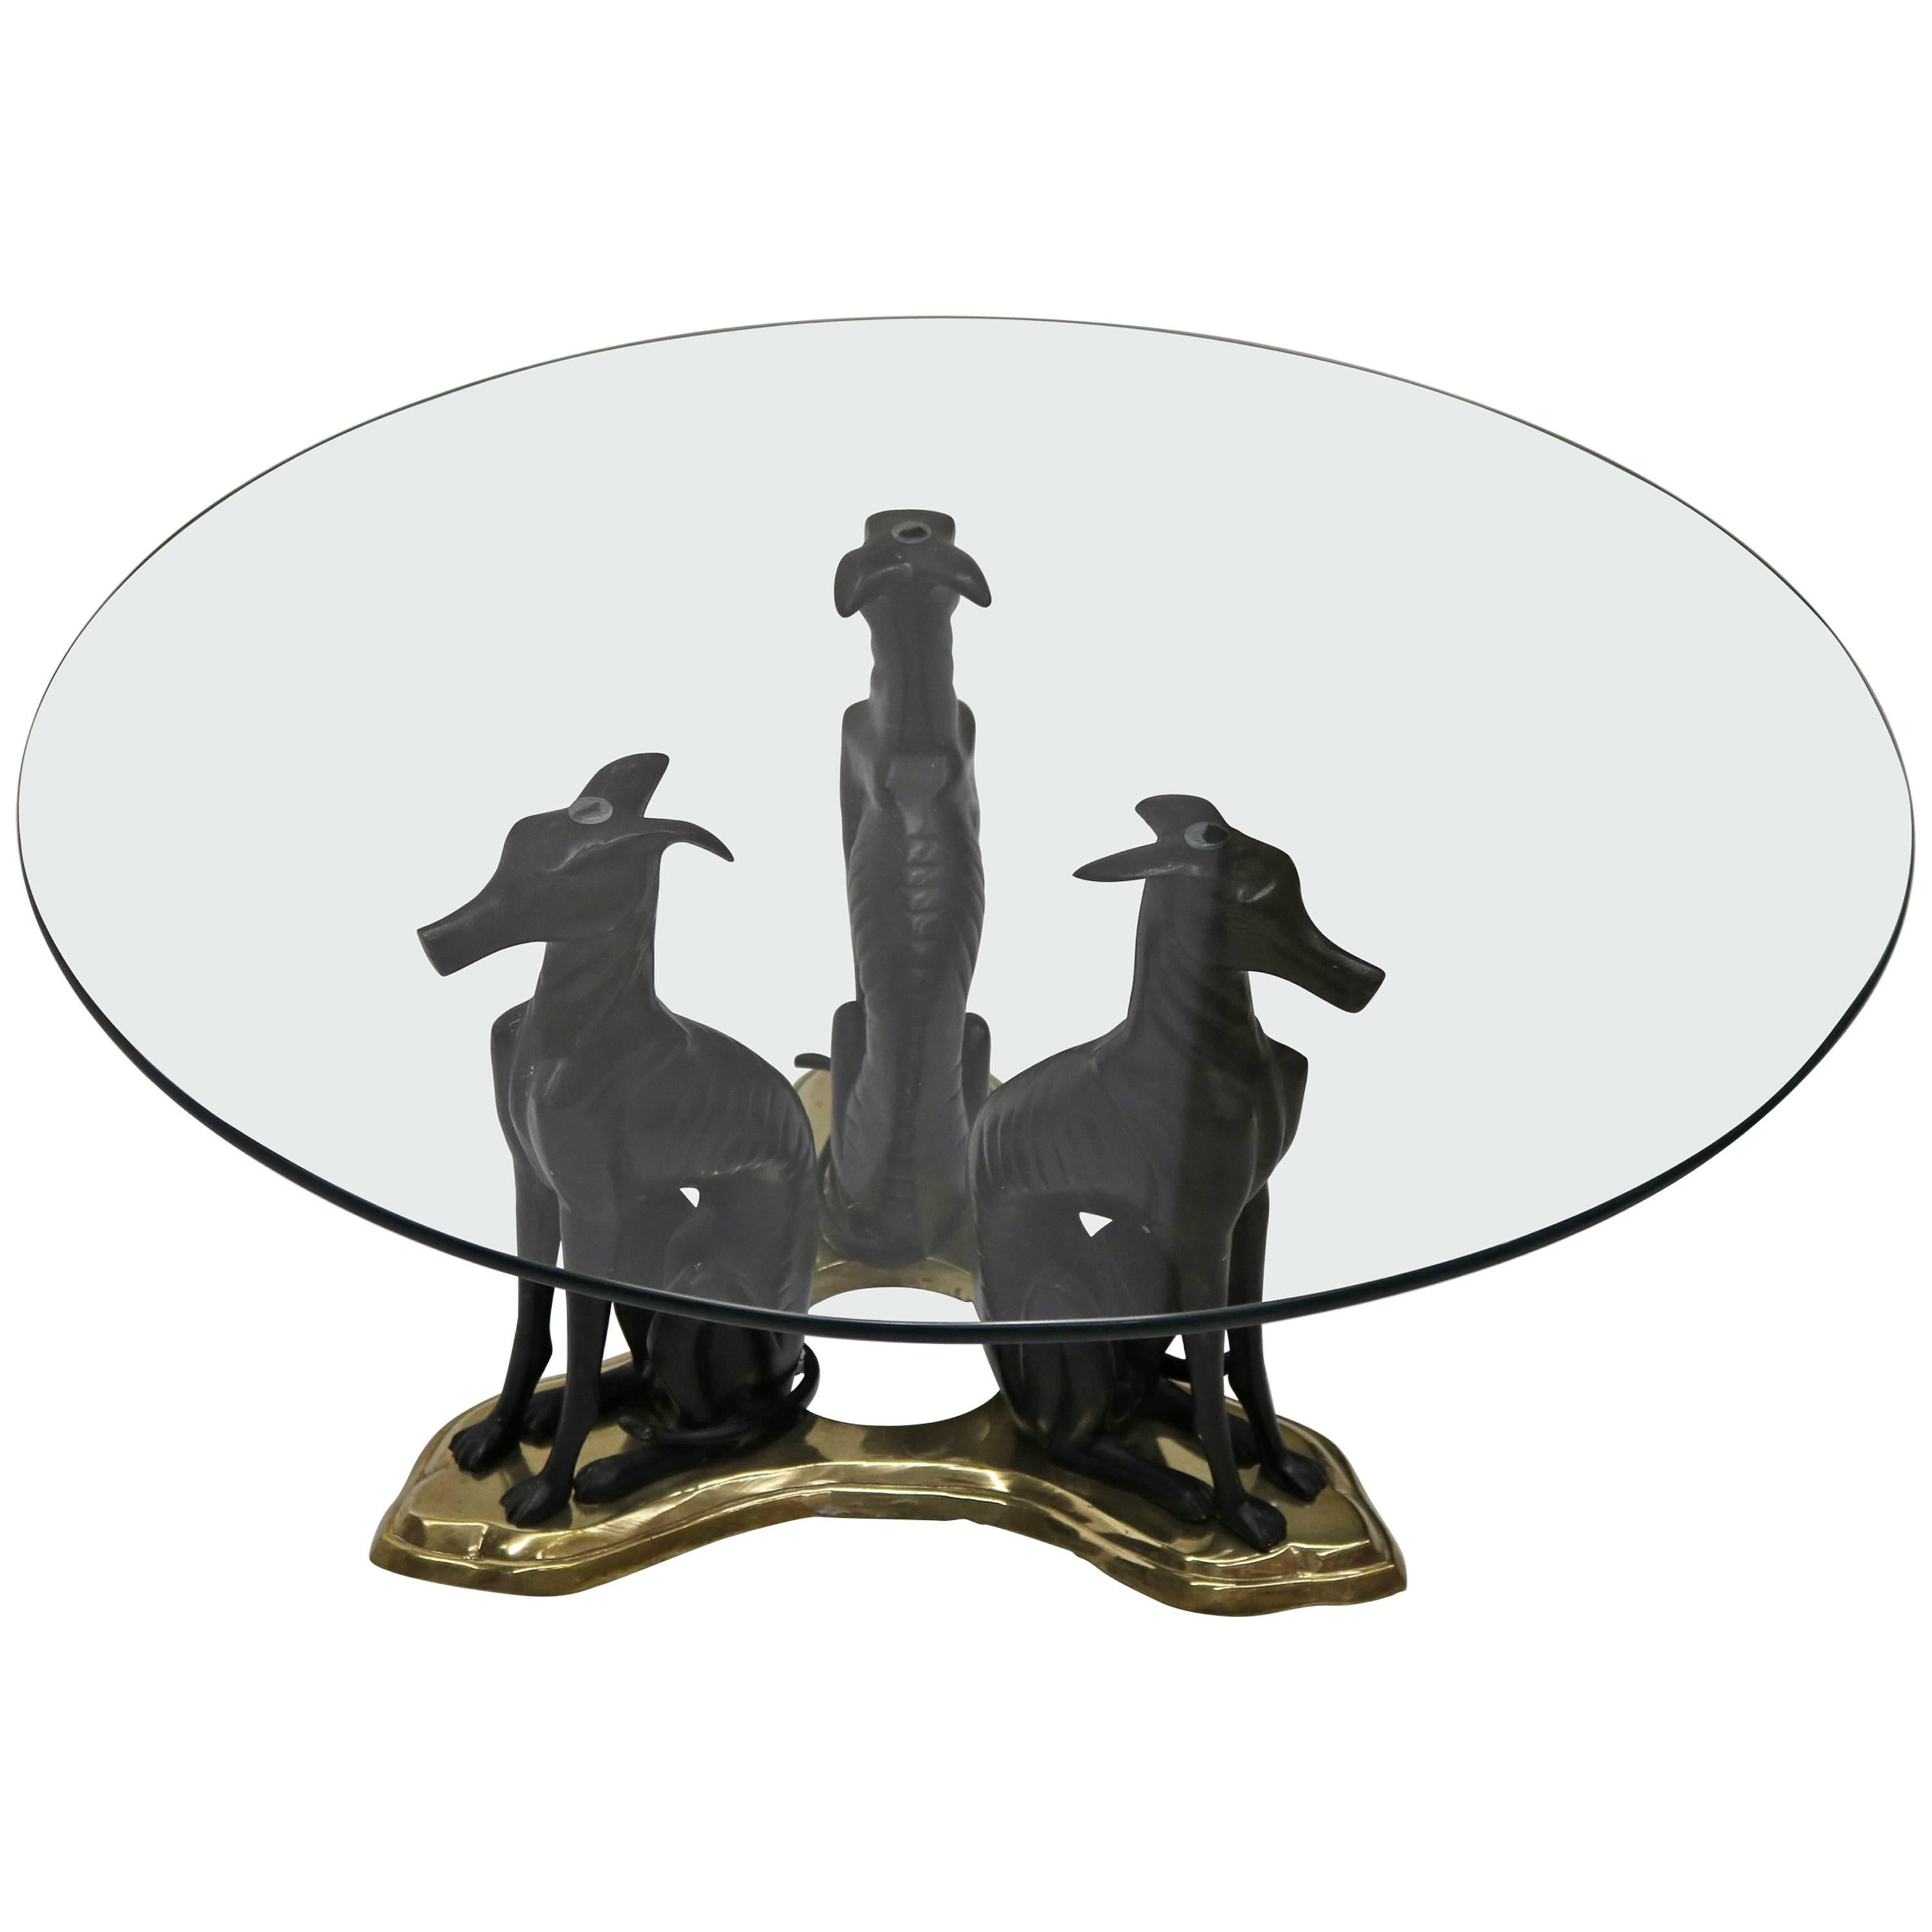 Three Bronze Greyhounds with a Glass Top Coffee Table by Maitland Smith